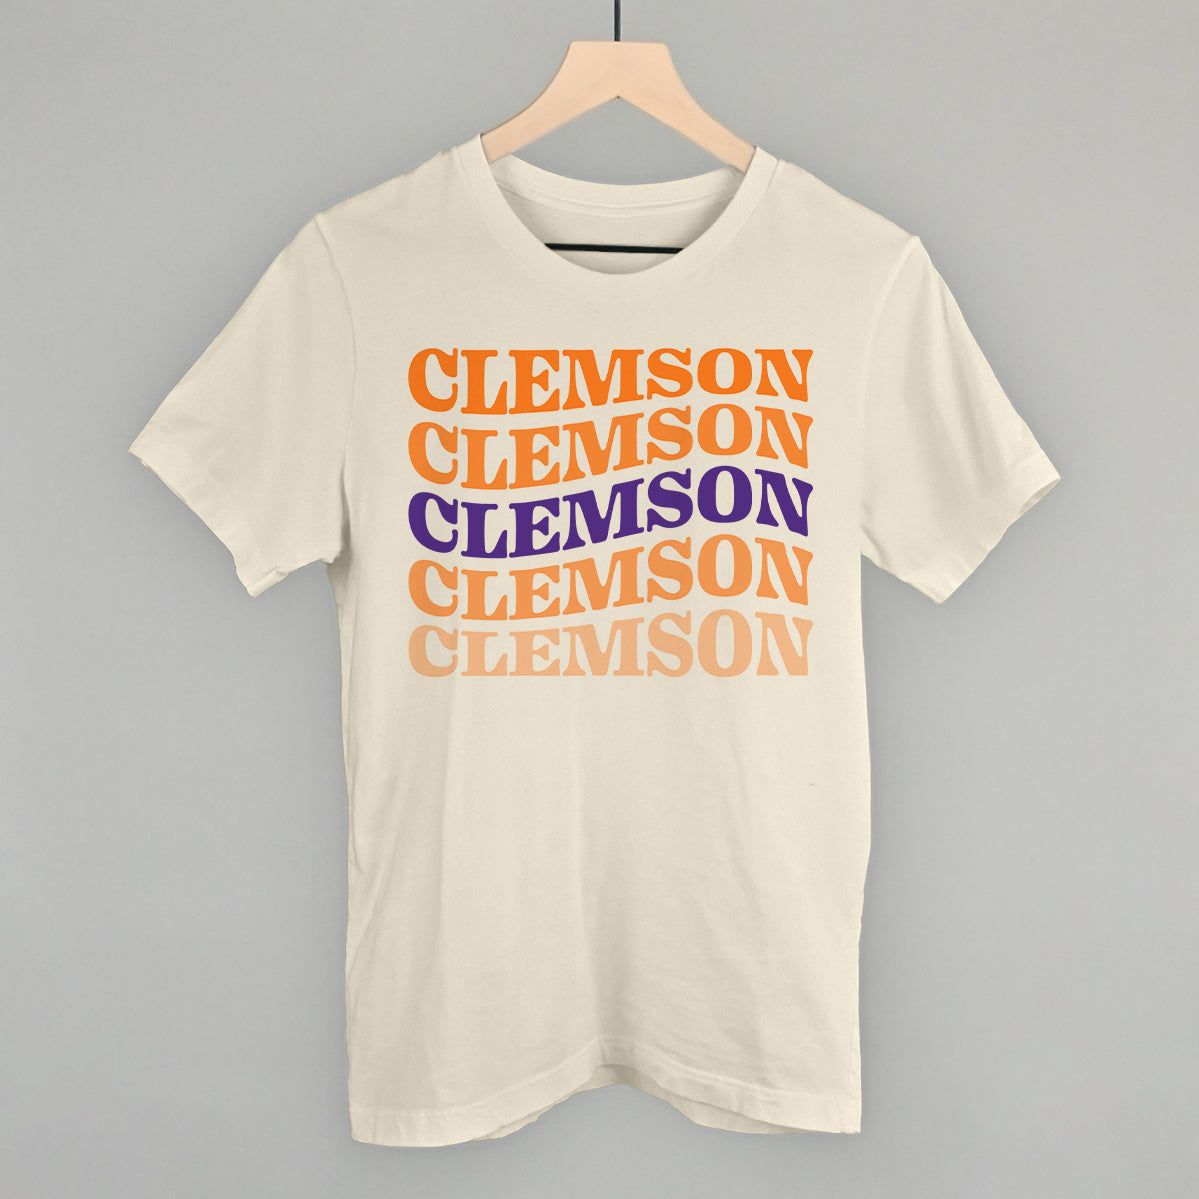 Clemson (Repeated Wave)